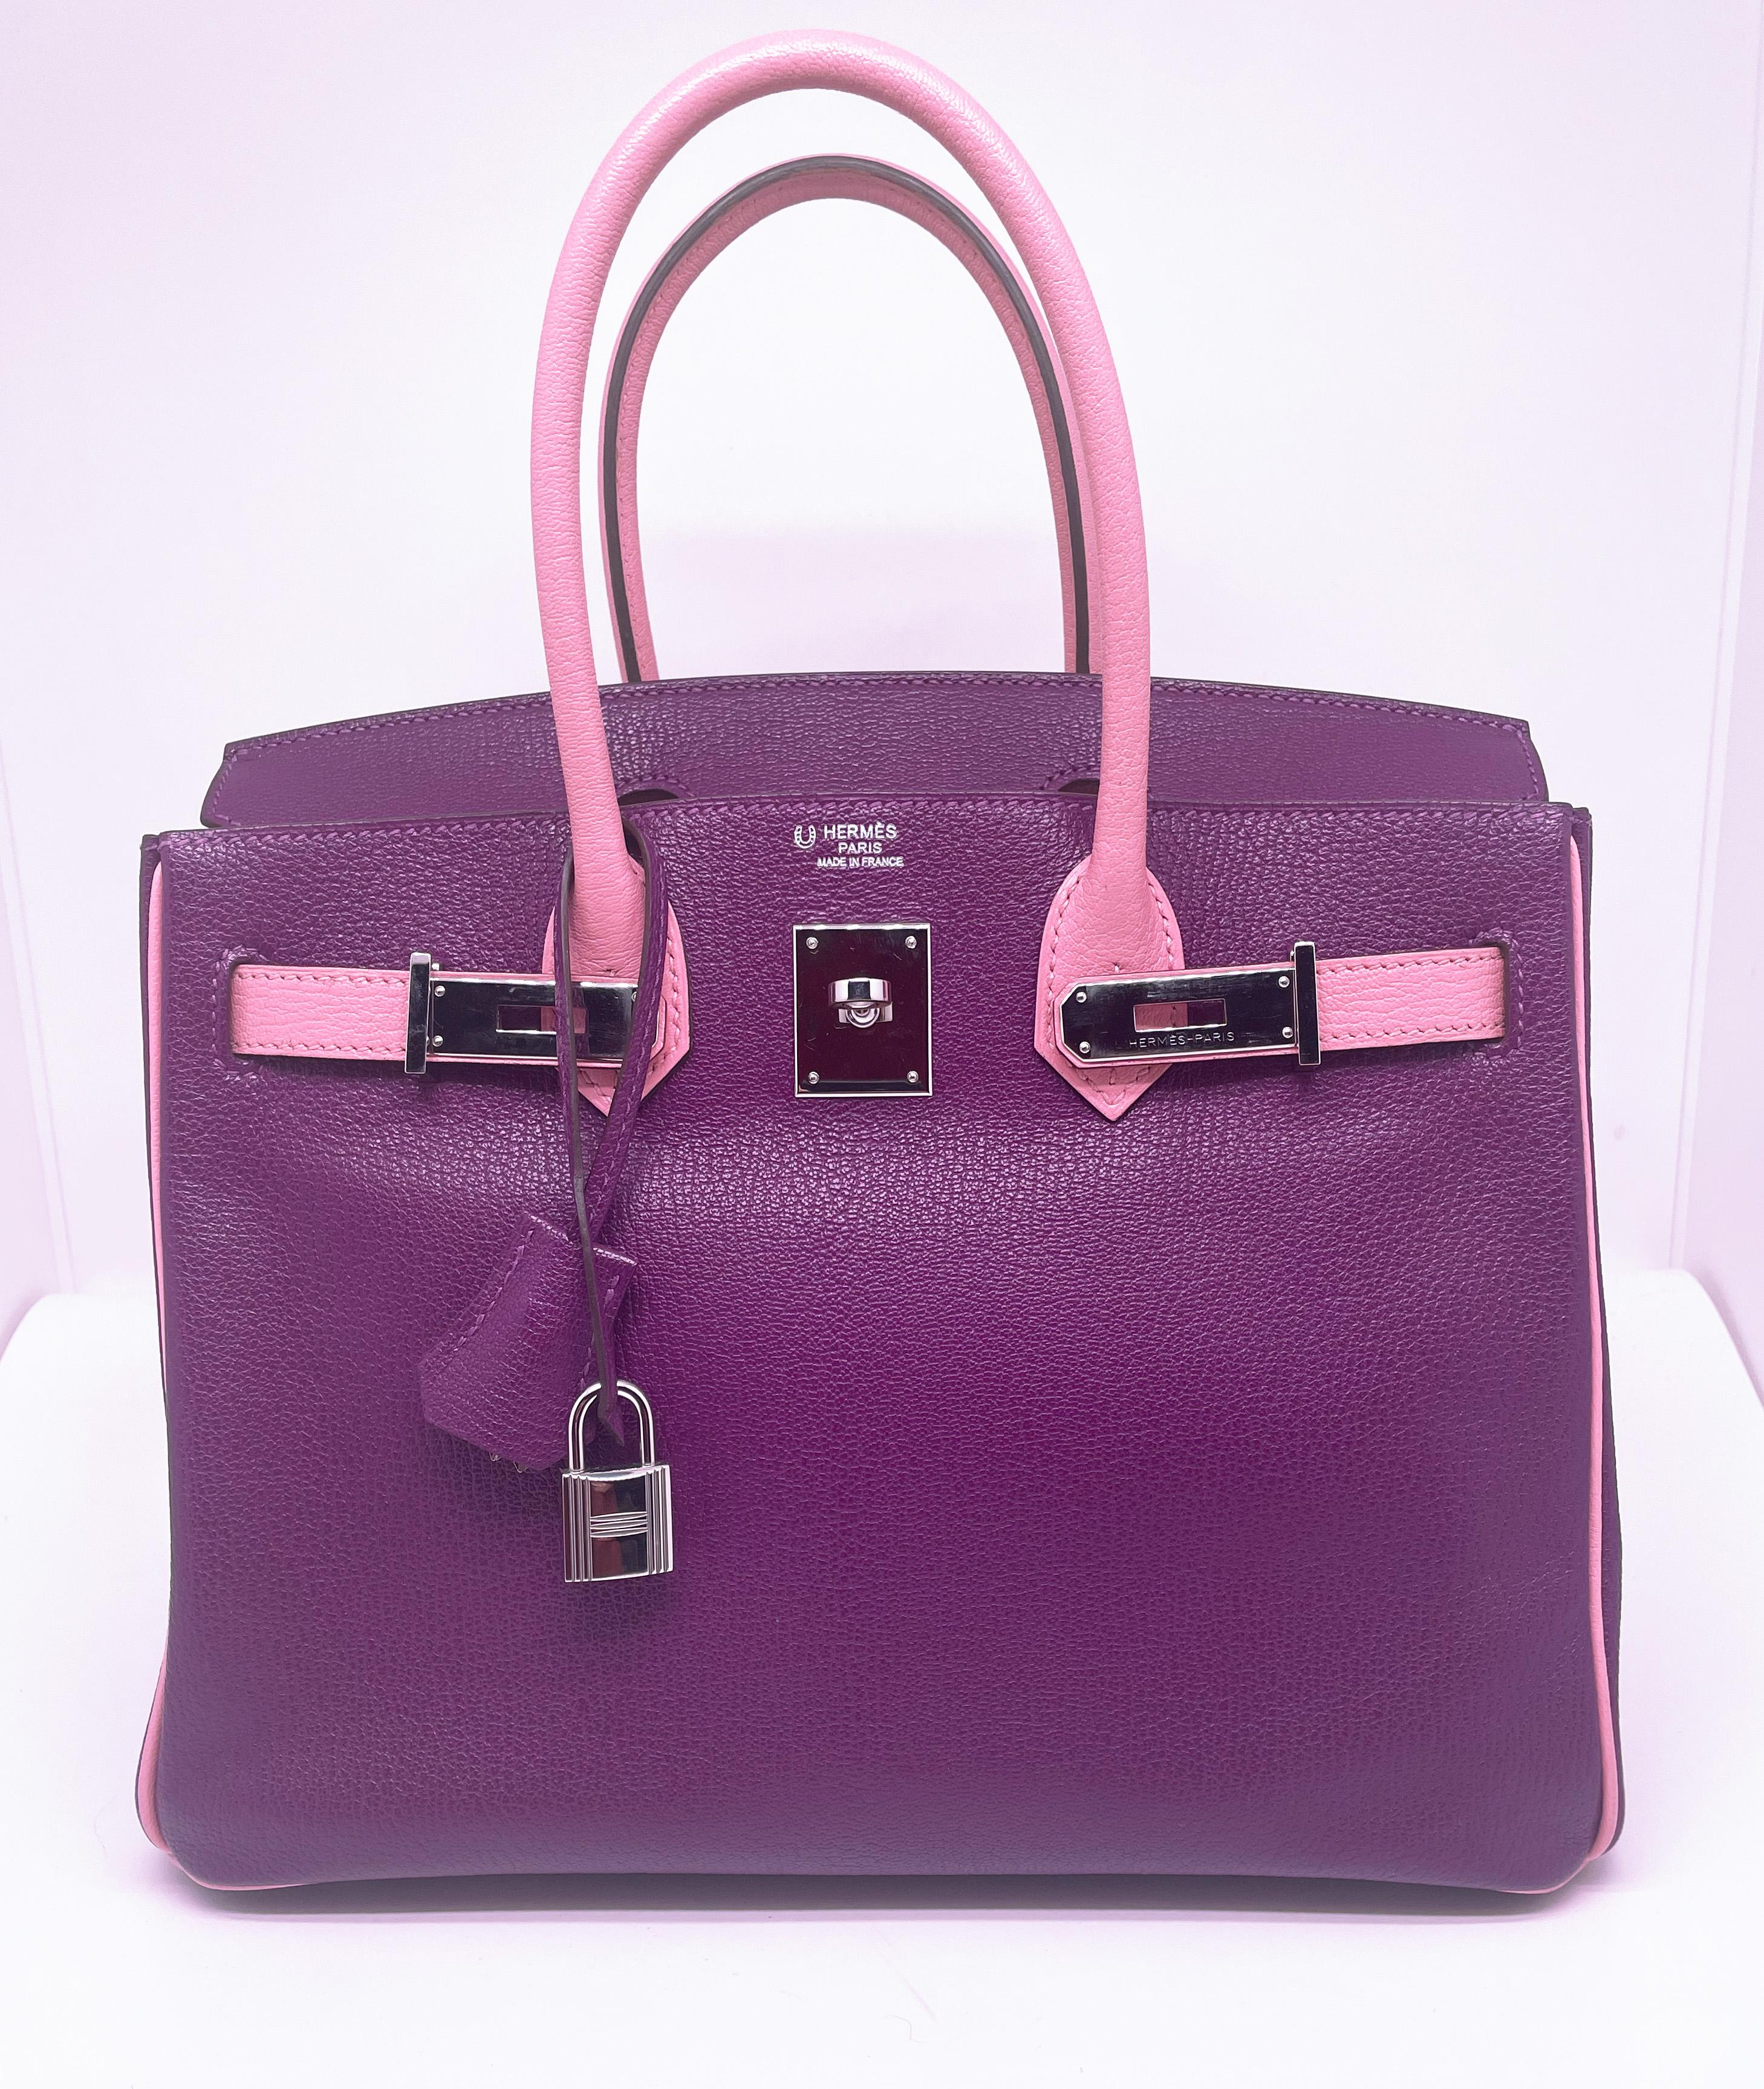 Superb Hermes Birkin bag 30 cm Bi color HHS Goatskin Mysore Anemone and
Pink Confetti palladium silver trim, Special Order with horseshoe
Year of Manufacture 2013
Included Padlock, Keys, Bell, Dustbag, Box,
Very good condition, very slight wear